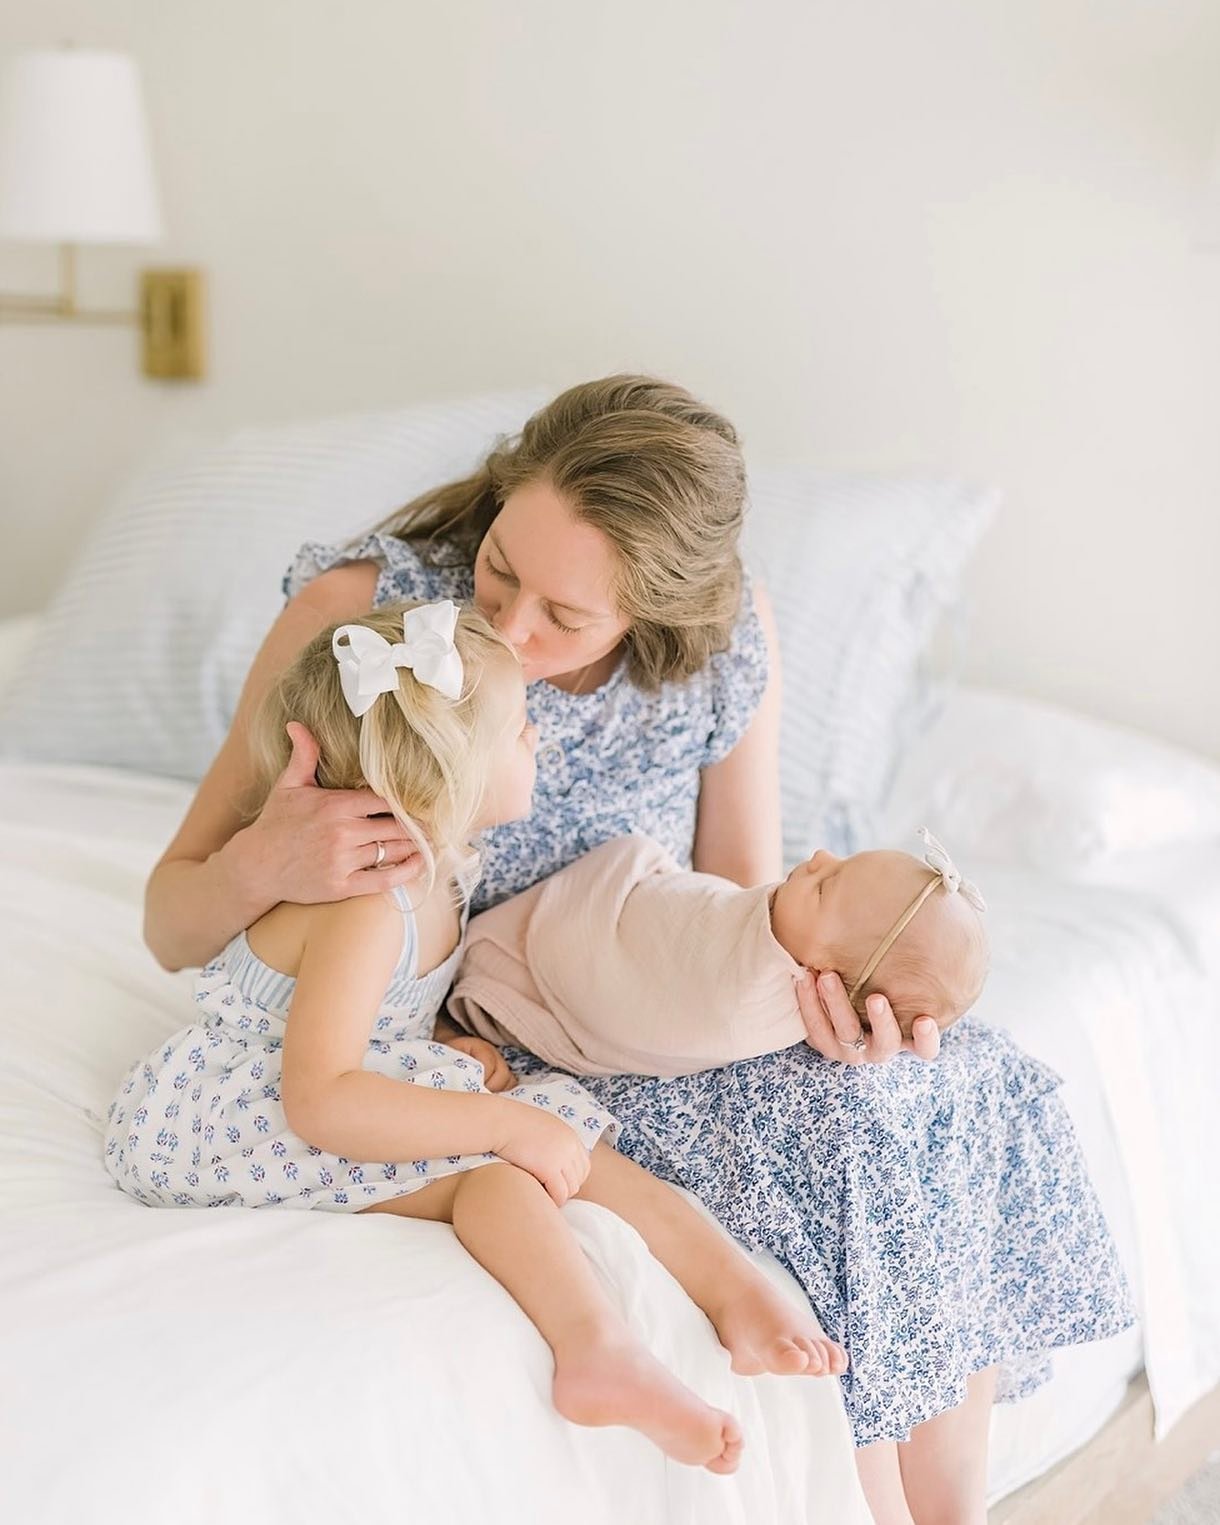 Happy Mother&rsquo;s Day to all of the amazing mamas doing the hard yet oh so wonderful work day in and day out&hellip; what a blessing to be loved and cherished by your own 💐
.
.
.
.
.
#dallasnewbornphotographer #dfwnewbornphotographer #ftworthnewb